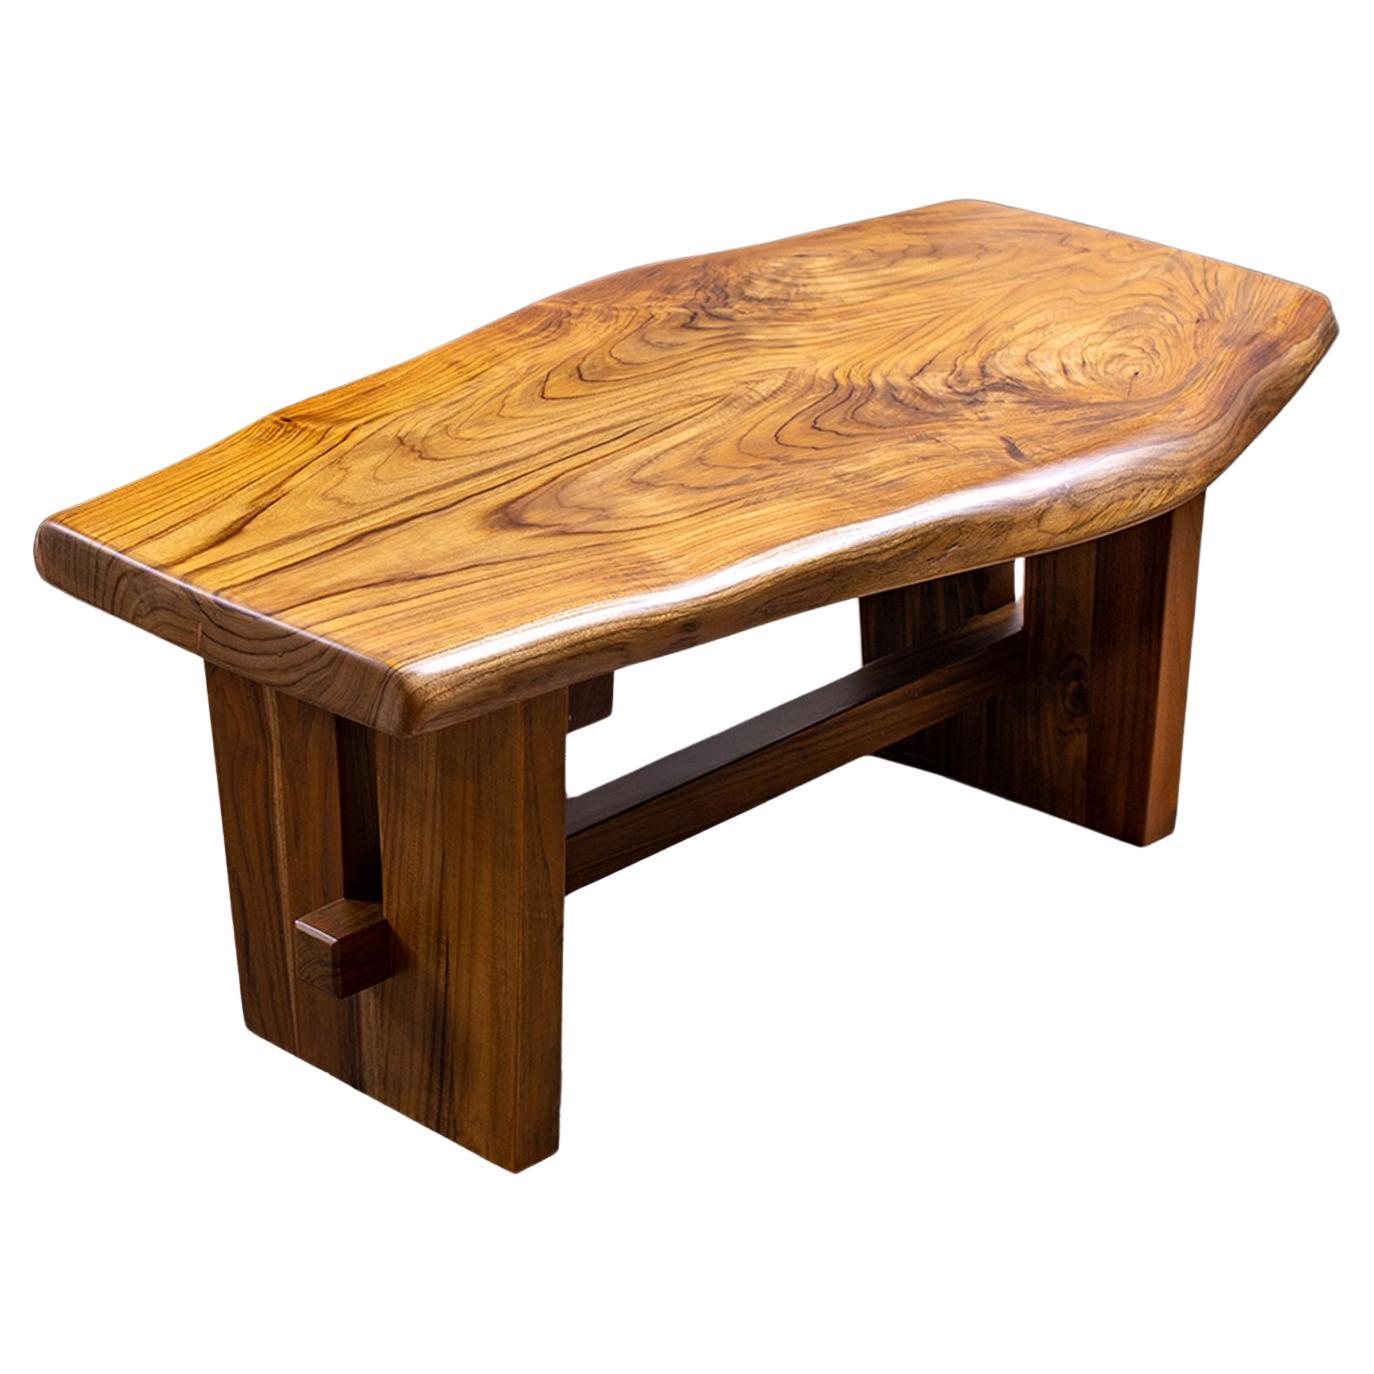 Book-Match 100% Solid Teak Live Edge Bench in a Smooth Autumn Finish For Sale